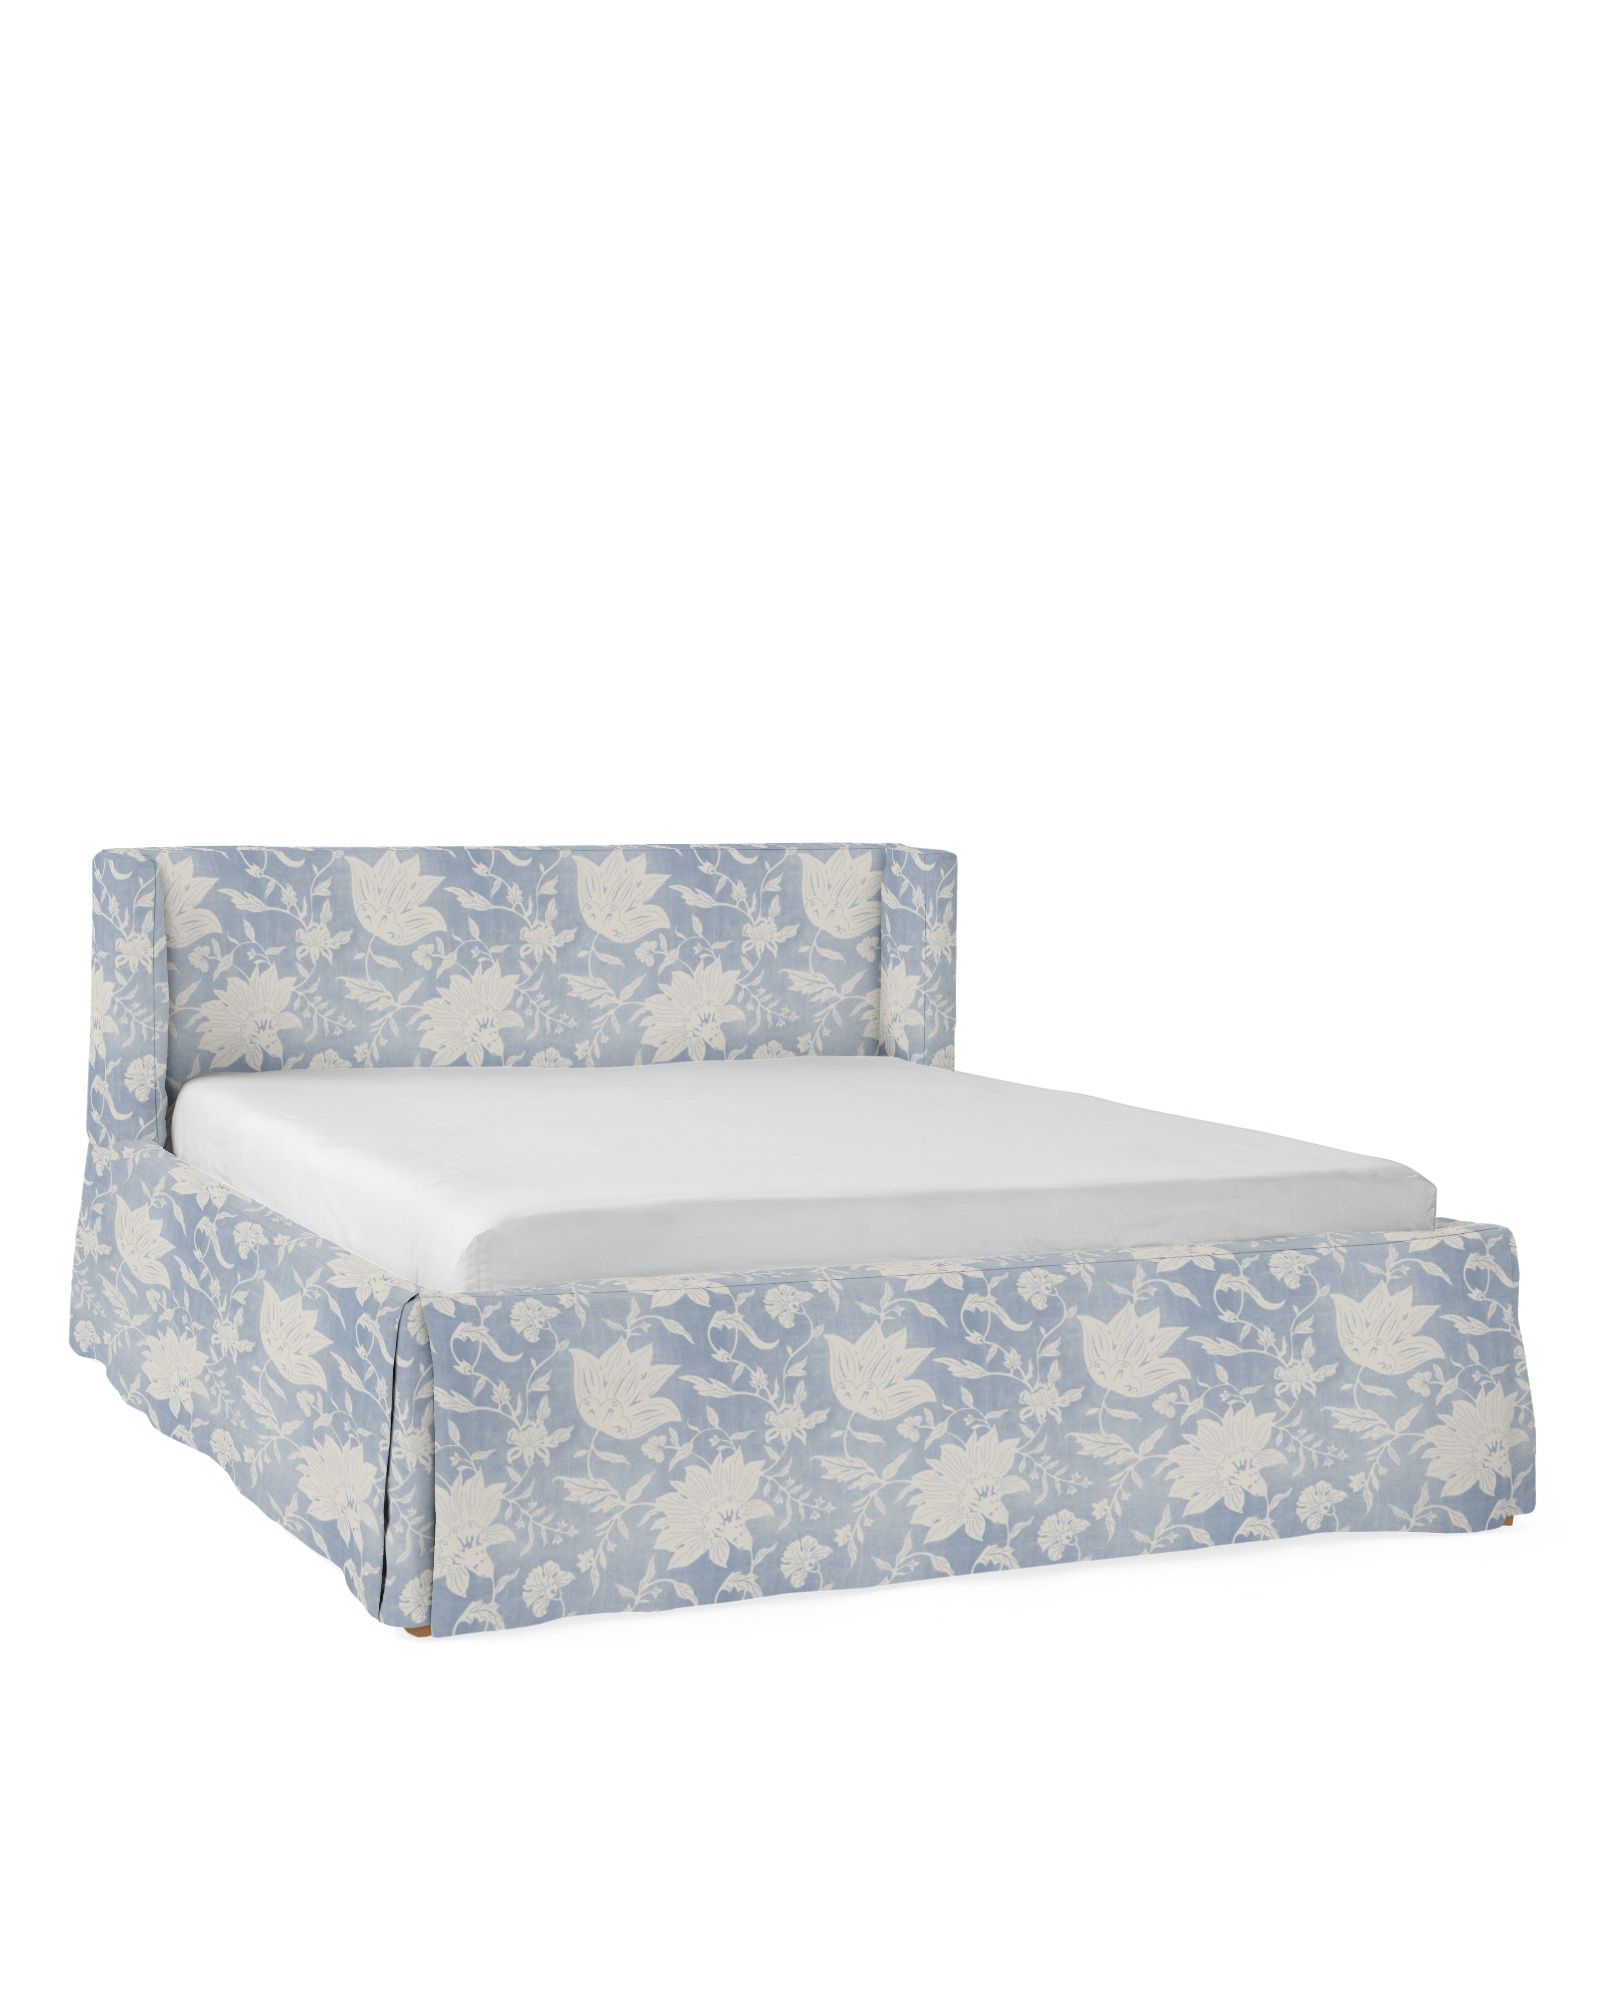 Broderick Slipcovered Bed | Serena and Lily